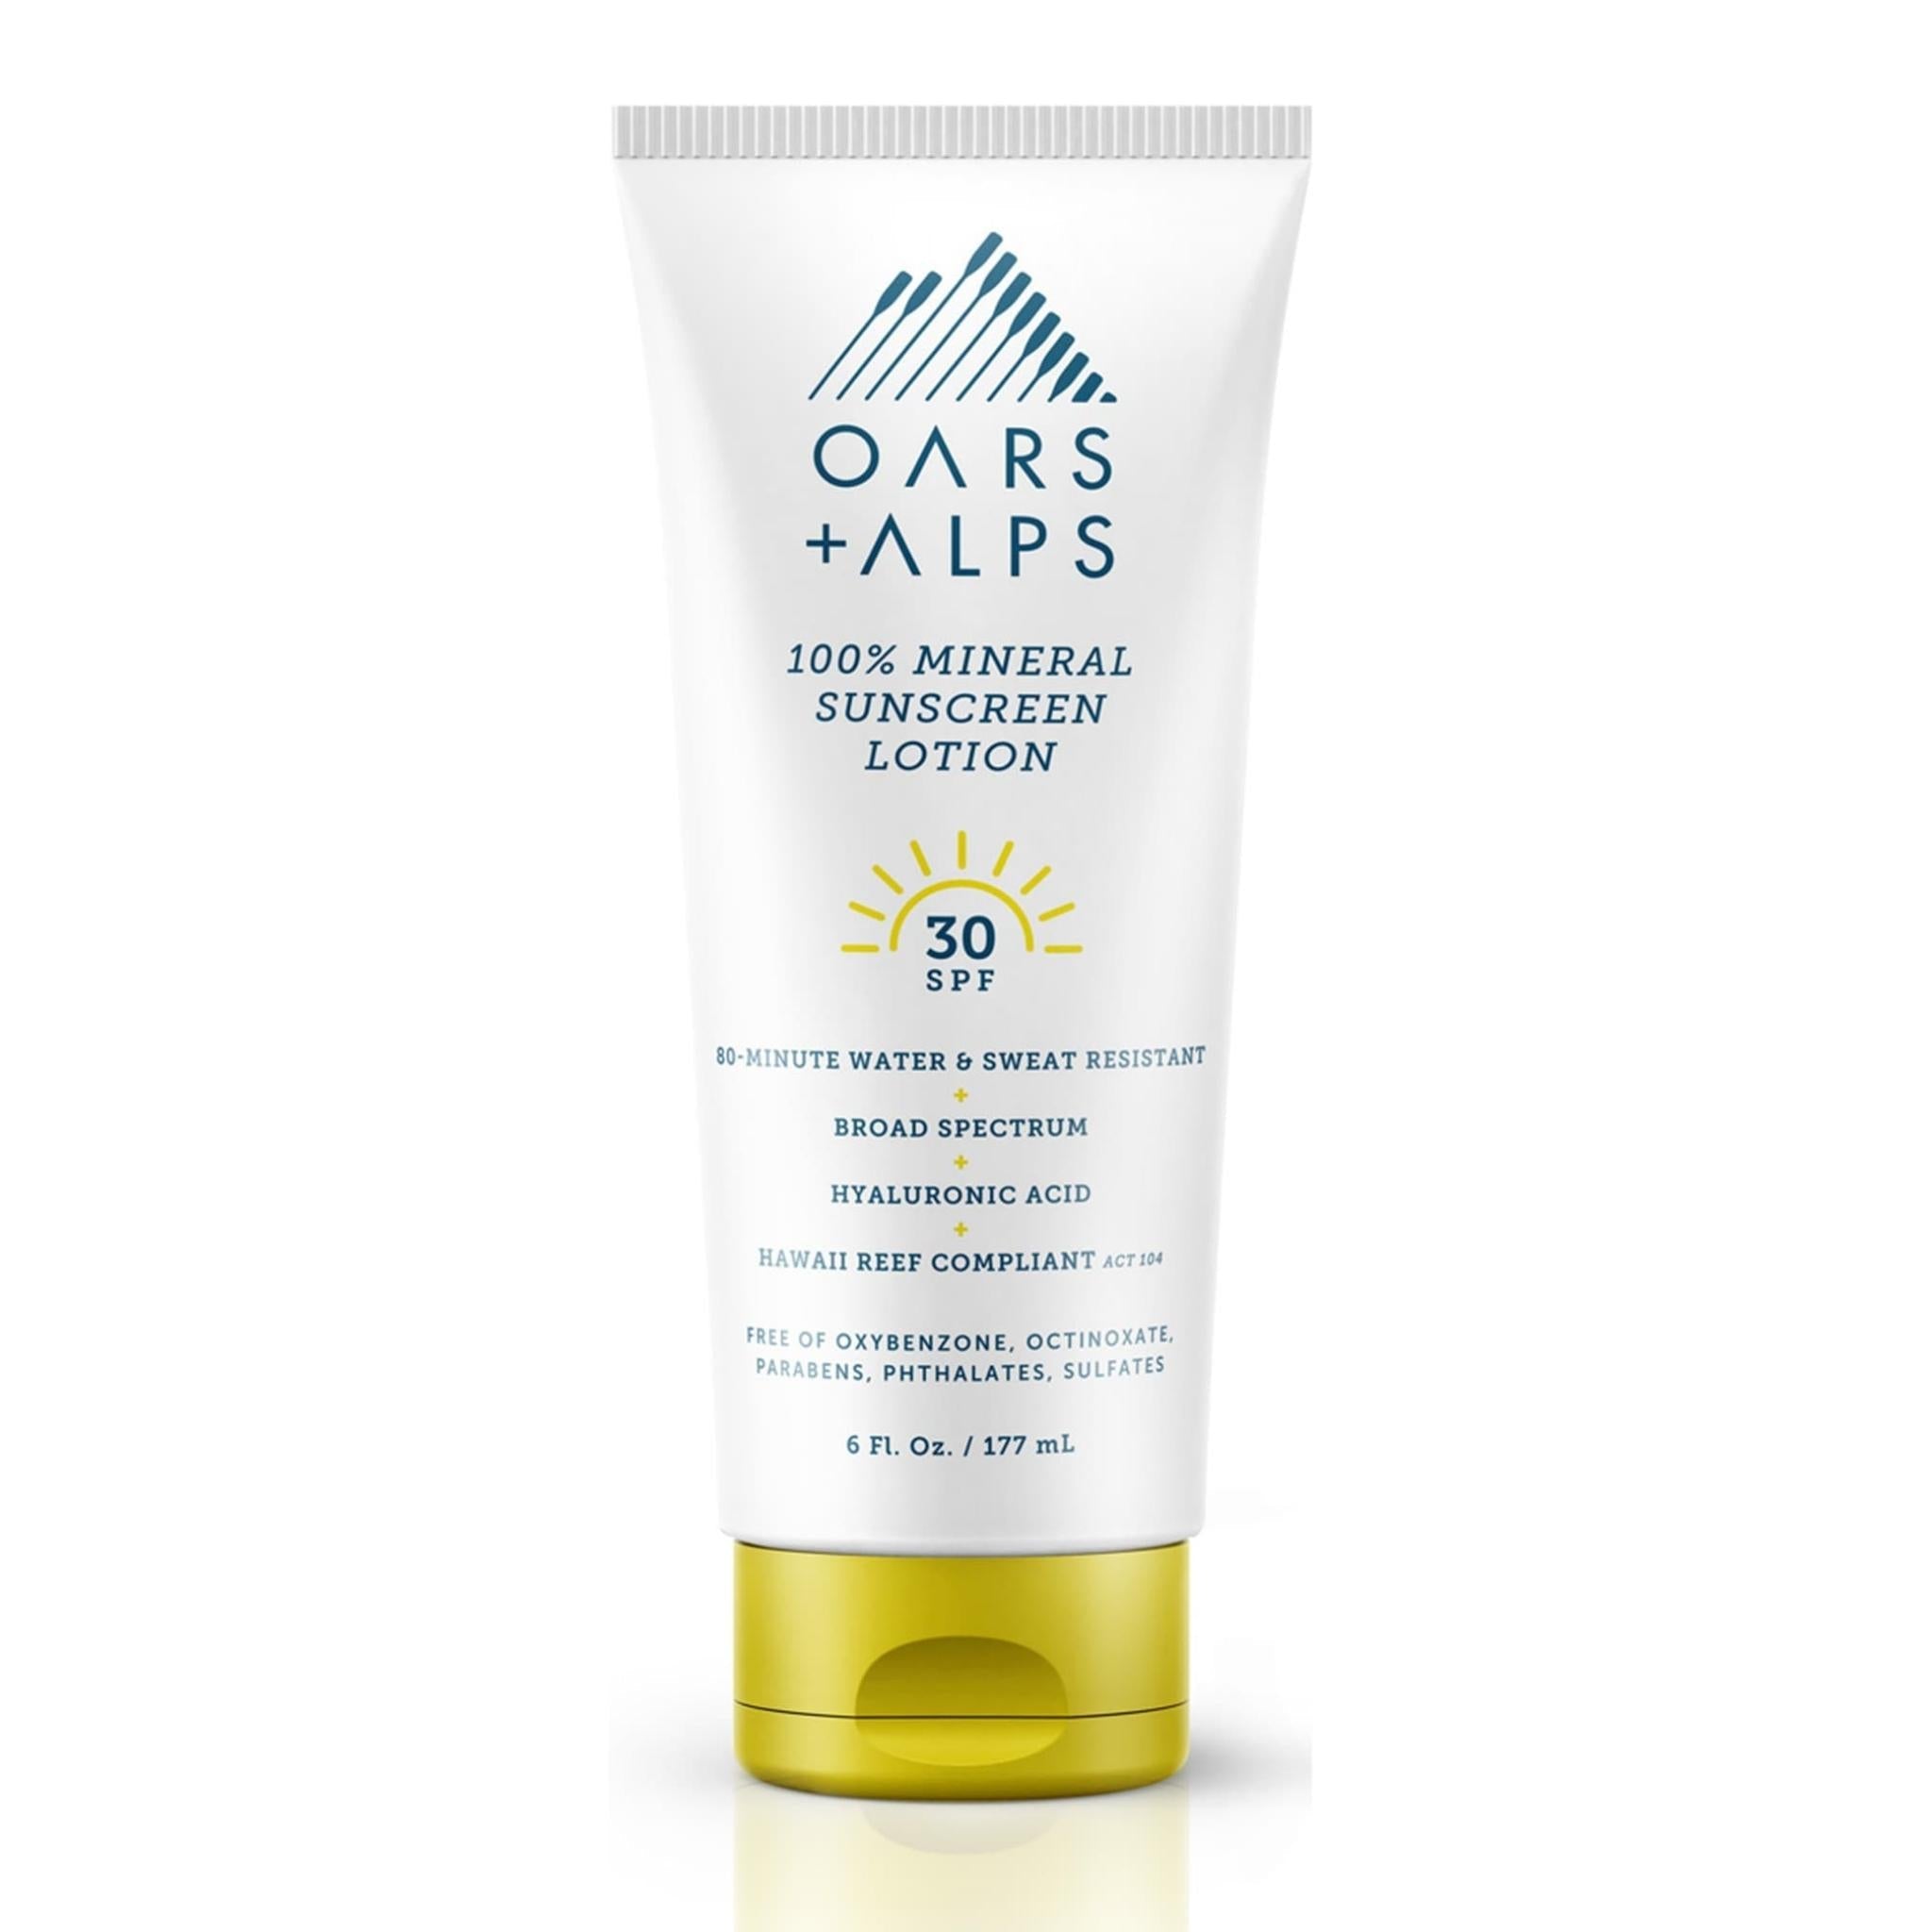 100% Mineral Sunscreen Lotion with SPF 30